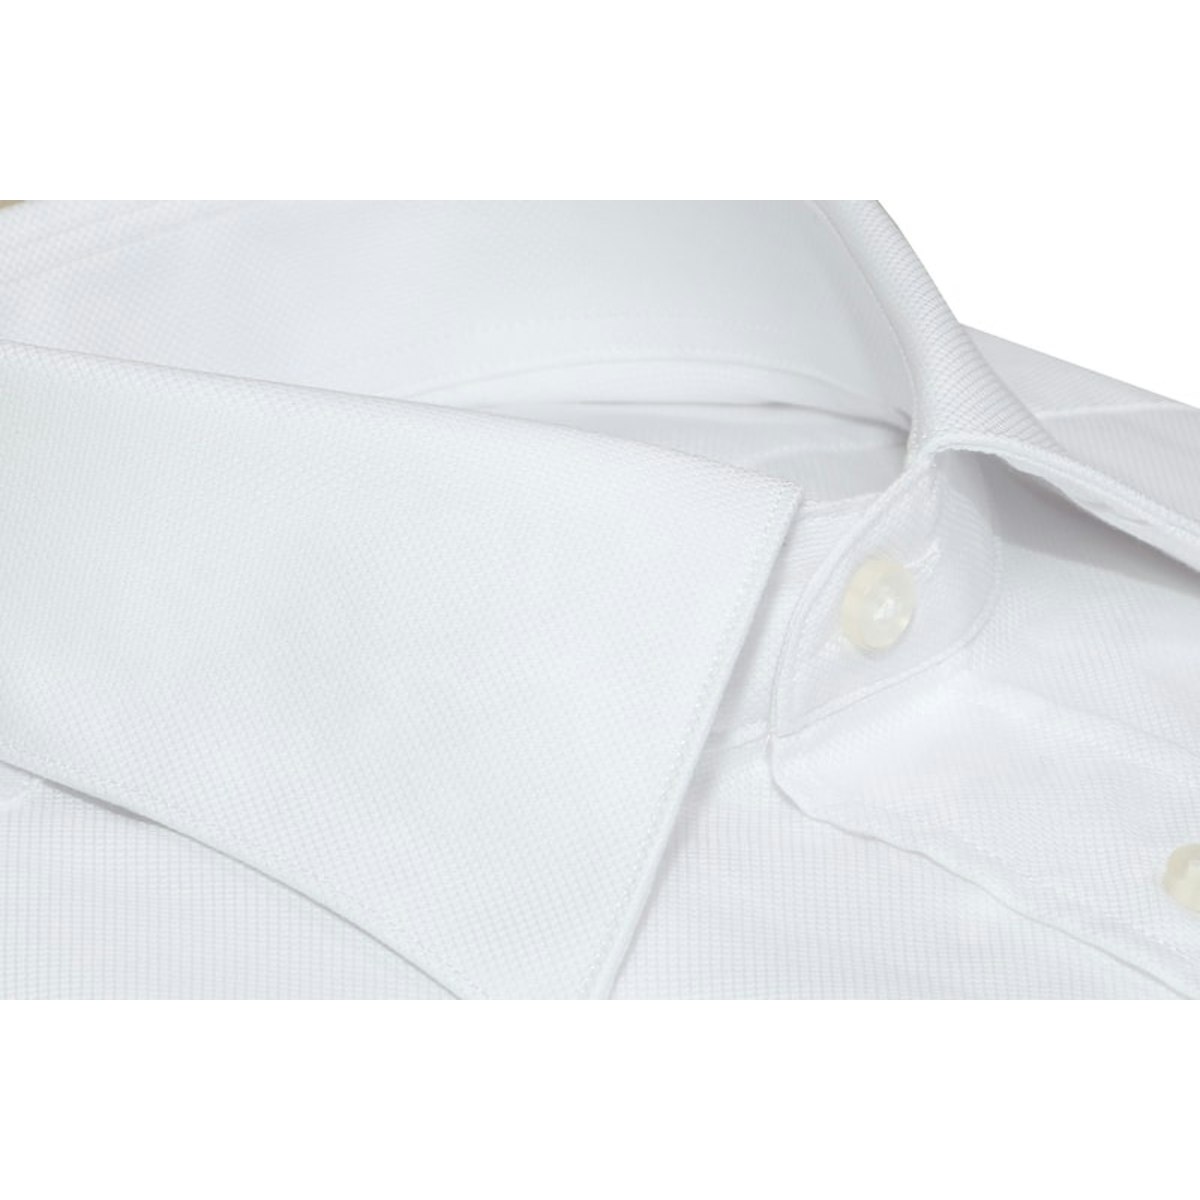 InStitchu Collection The Cary Shirt